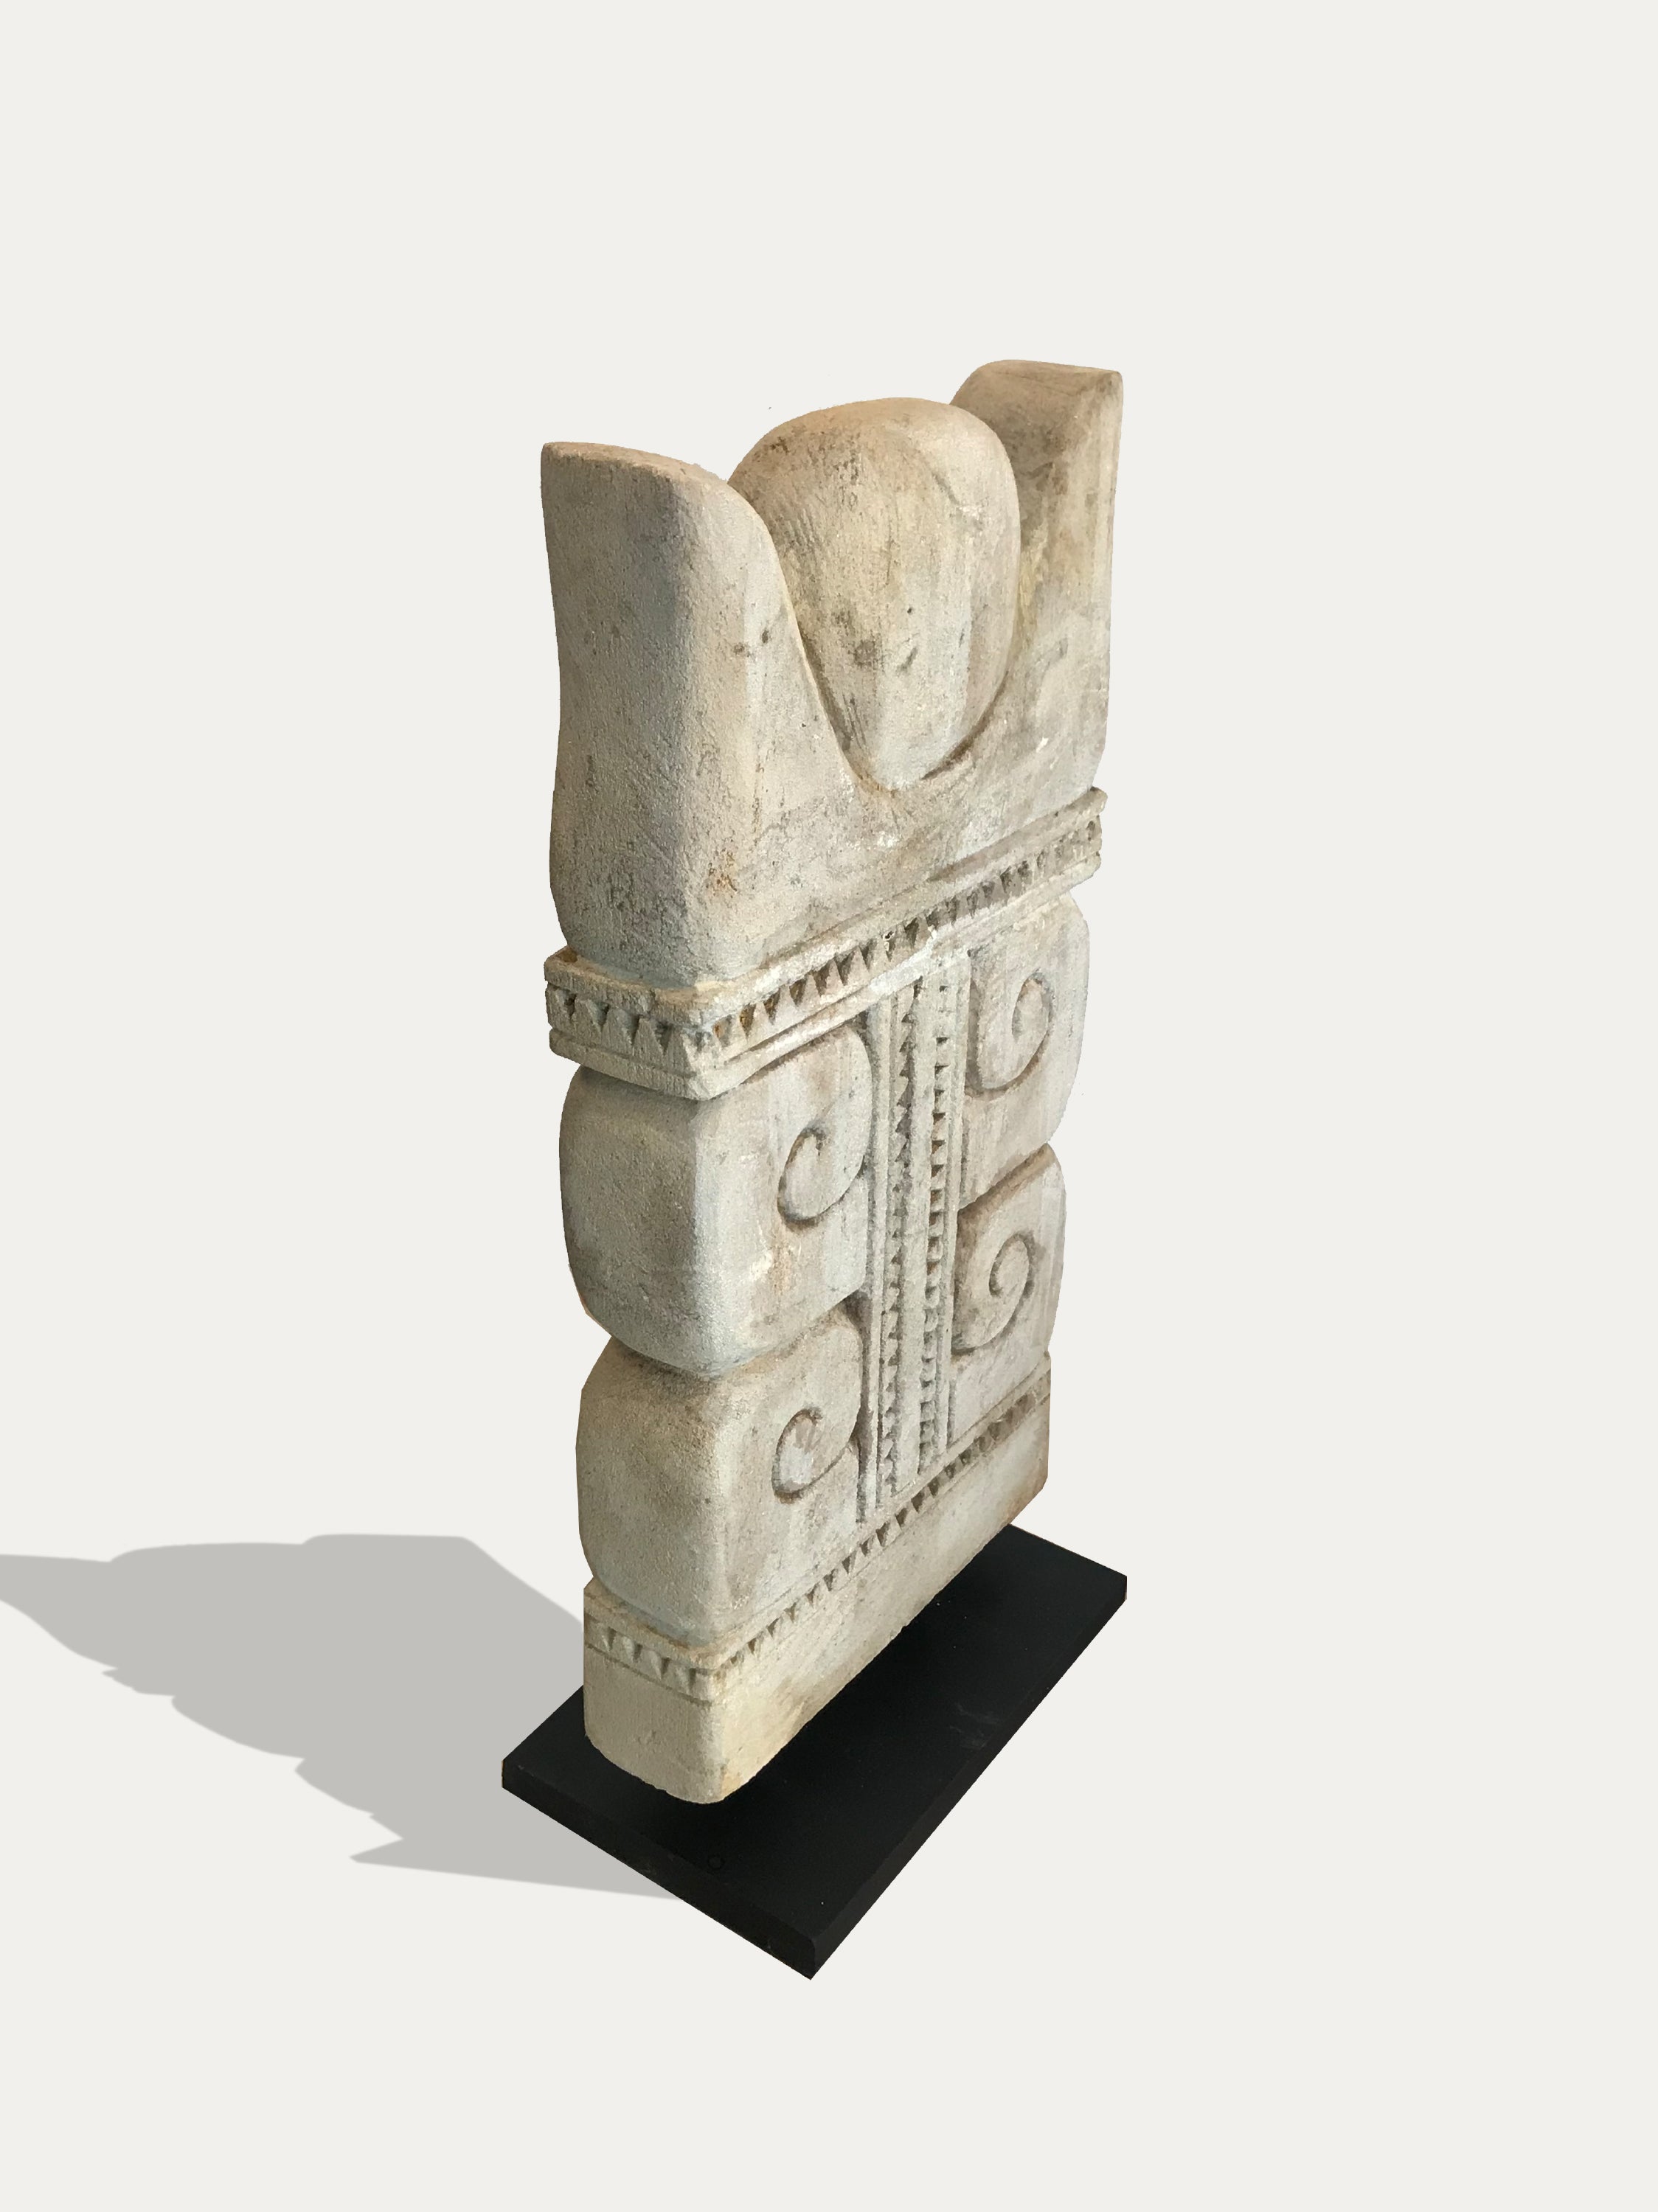 Asian art, A stele stone statue from Sumba in Indonesia from Kirschon.com